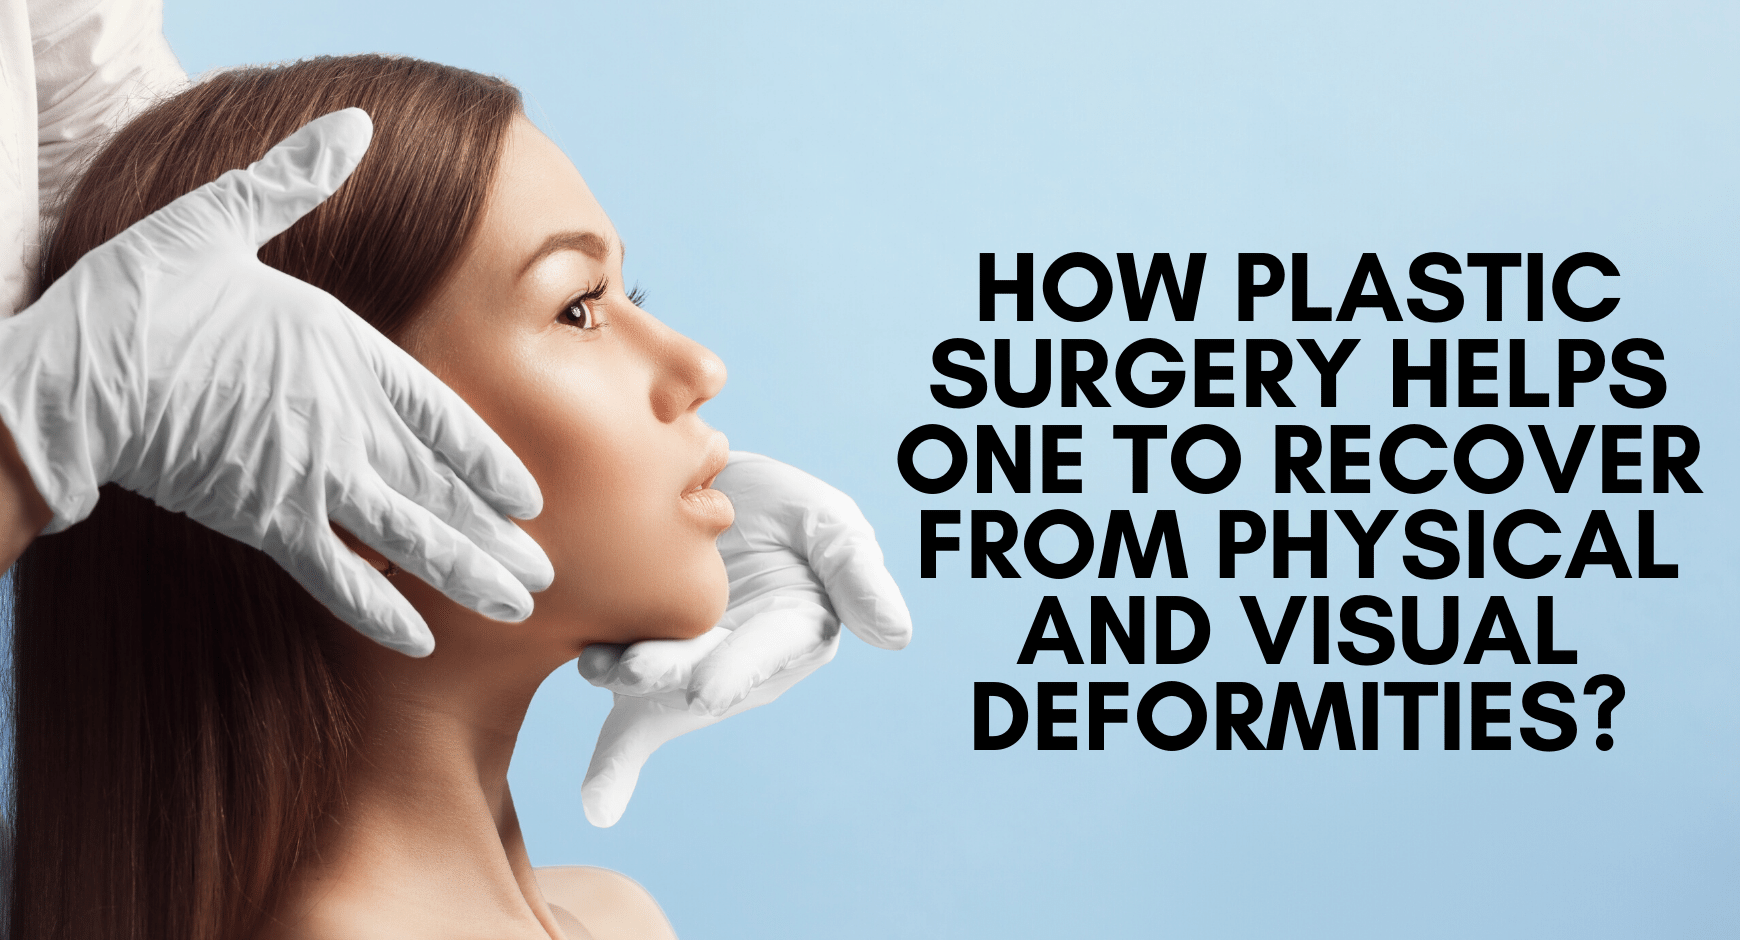 How plastic surgery helps one to recover from physical and visual deformities?